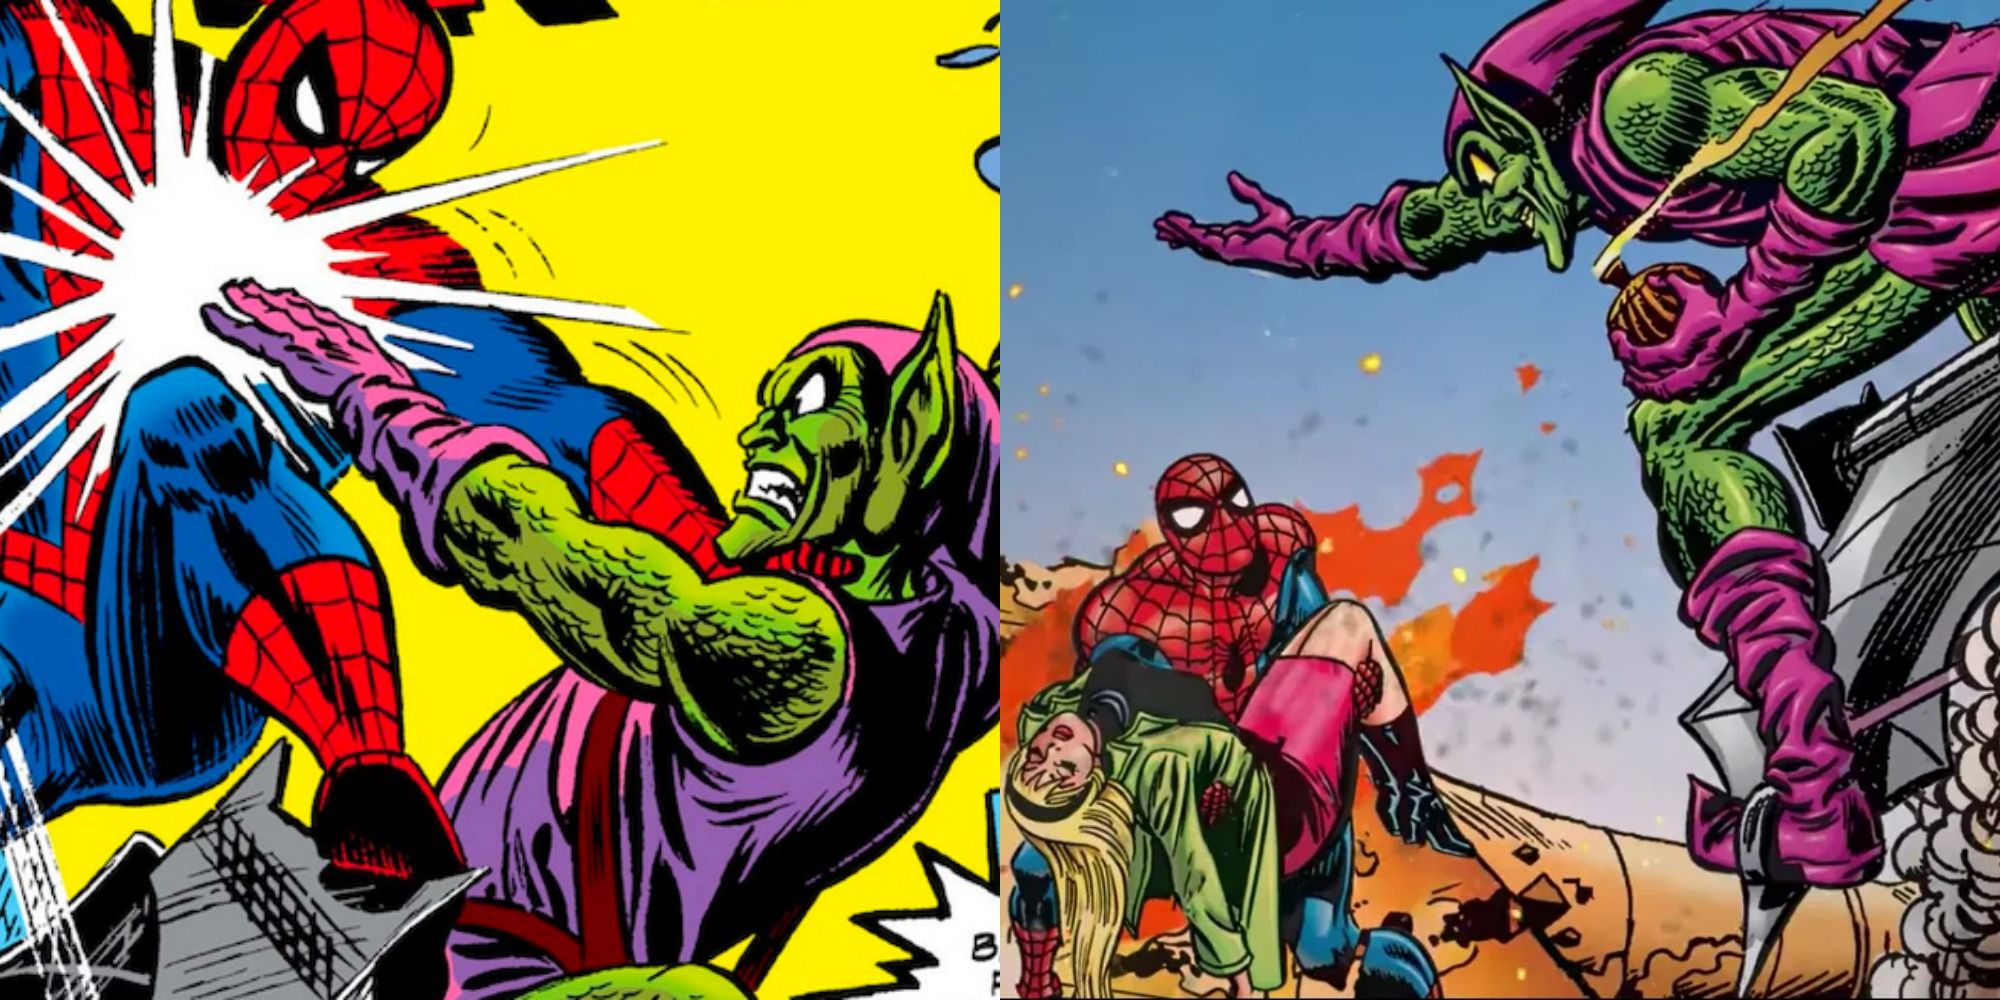 Split image showing Spider-Man fighting the Green Goblin two times